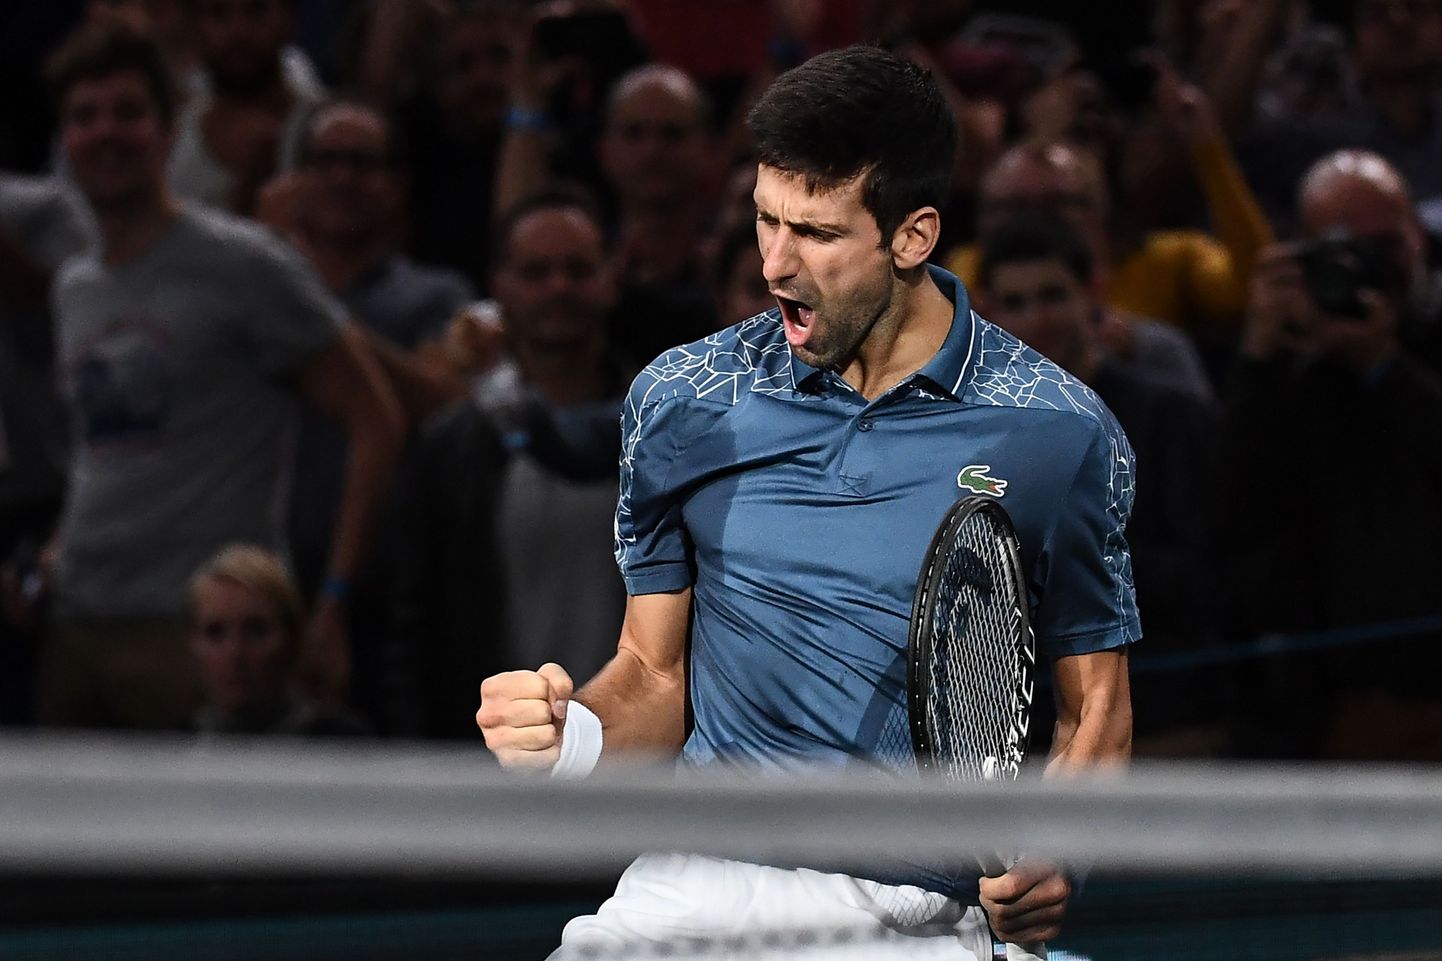 Serbia's Novak Djokovic celebrates after winning against Switzerland's Roger Federer at the end of their men's singles semi-final tennis match on day six of the ATP World Tour Masters 1000 - Rolex Paris Masters - indoor tennis tournament at The AccorHotels Arena in Paris, on November 3, 2018. (Photo by Anne-Christine POUJOULAT / AFP)